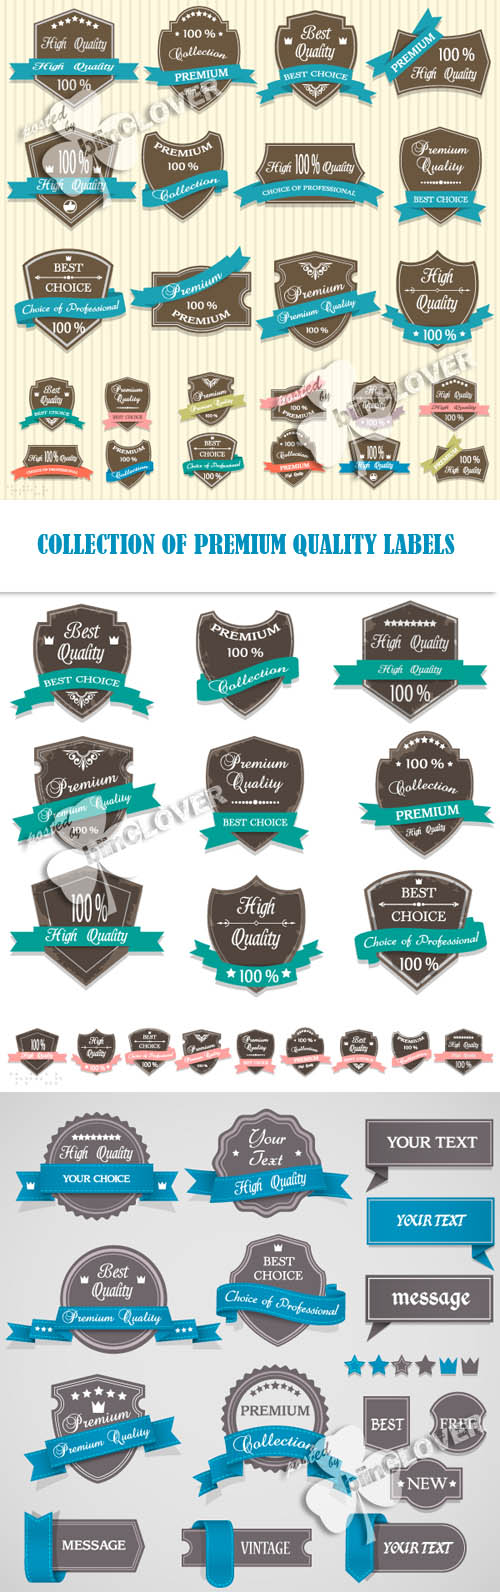 Collection of premium quality labels 0203